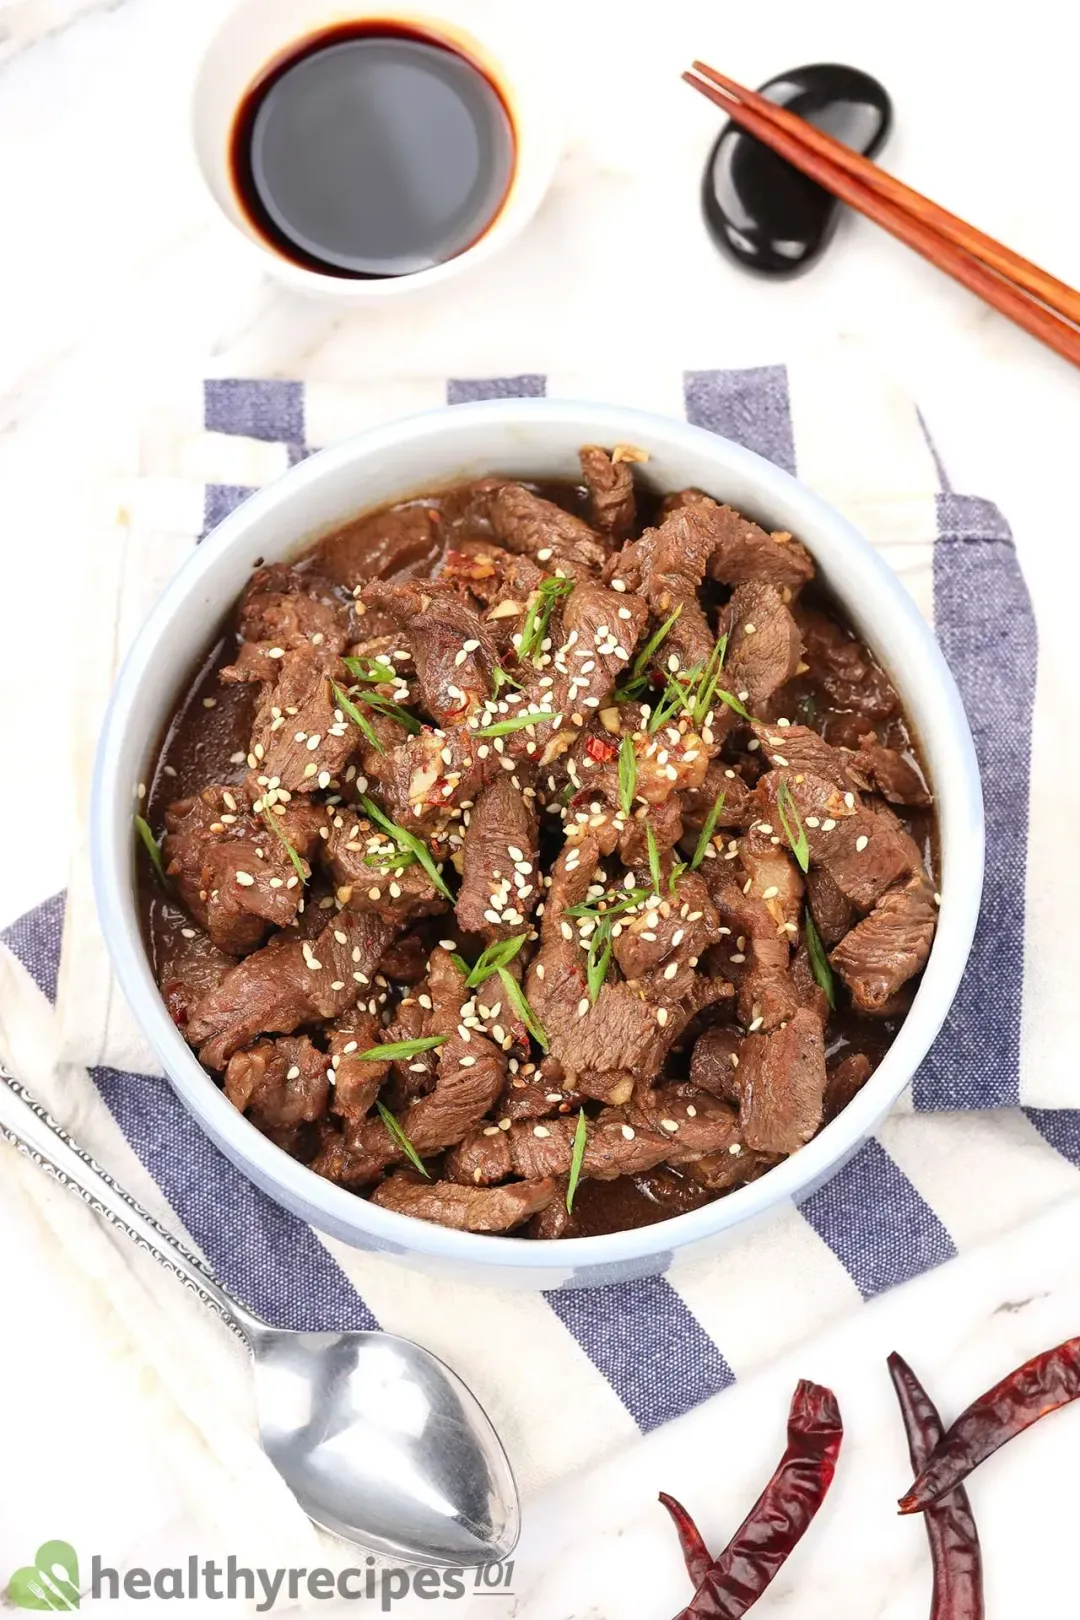 How to Store and Reheat Leftover Beef Bulgogi